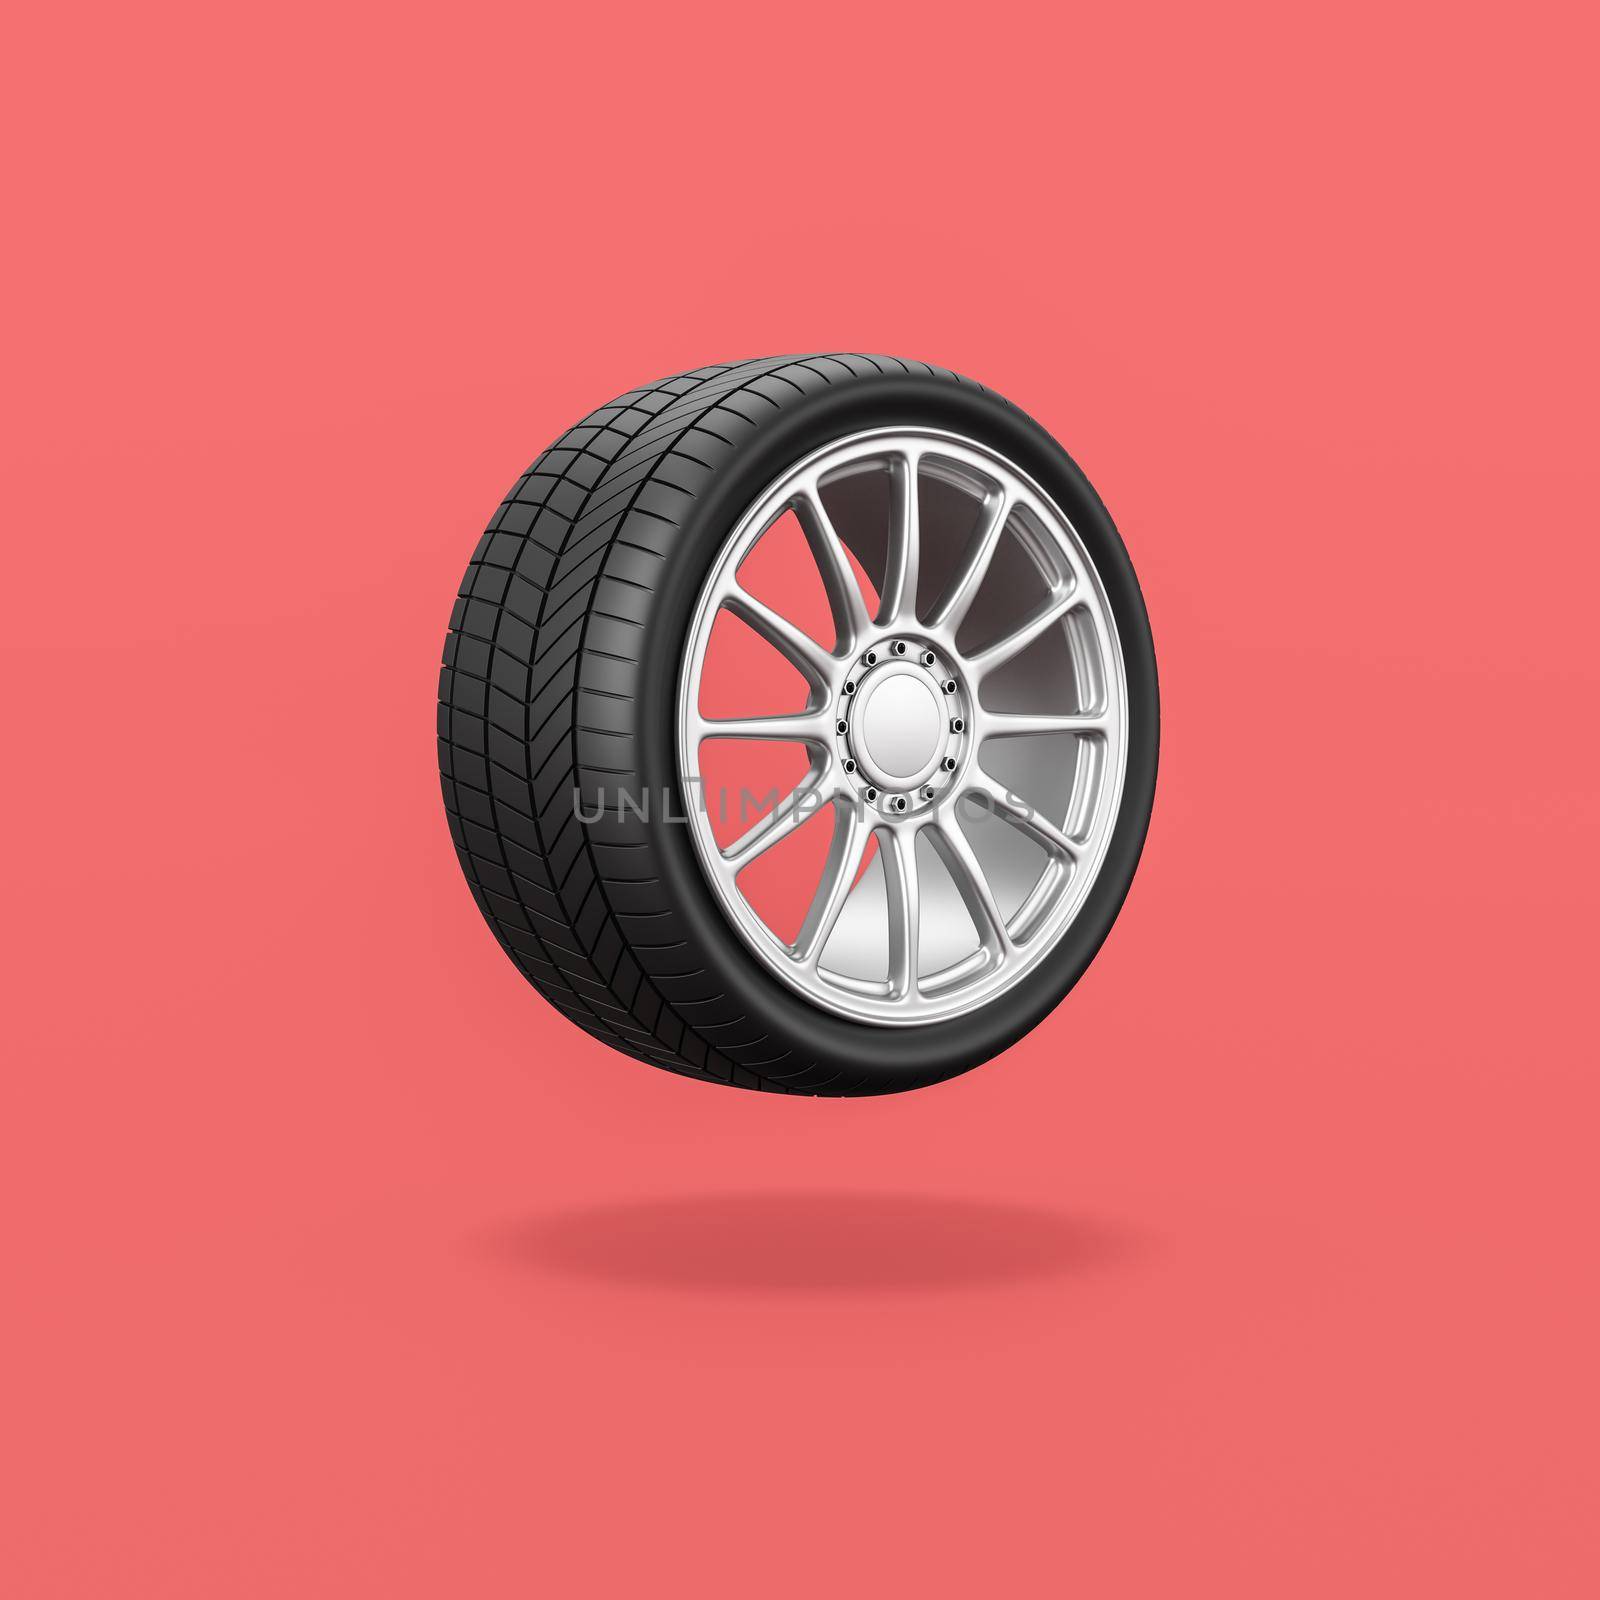 Single Car Wheel Isolated on Flat Red Background with Shadow 3D Illustration